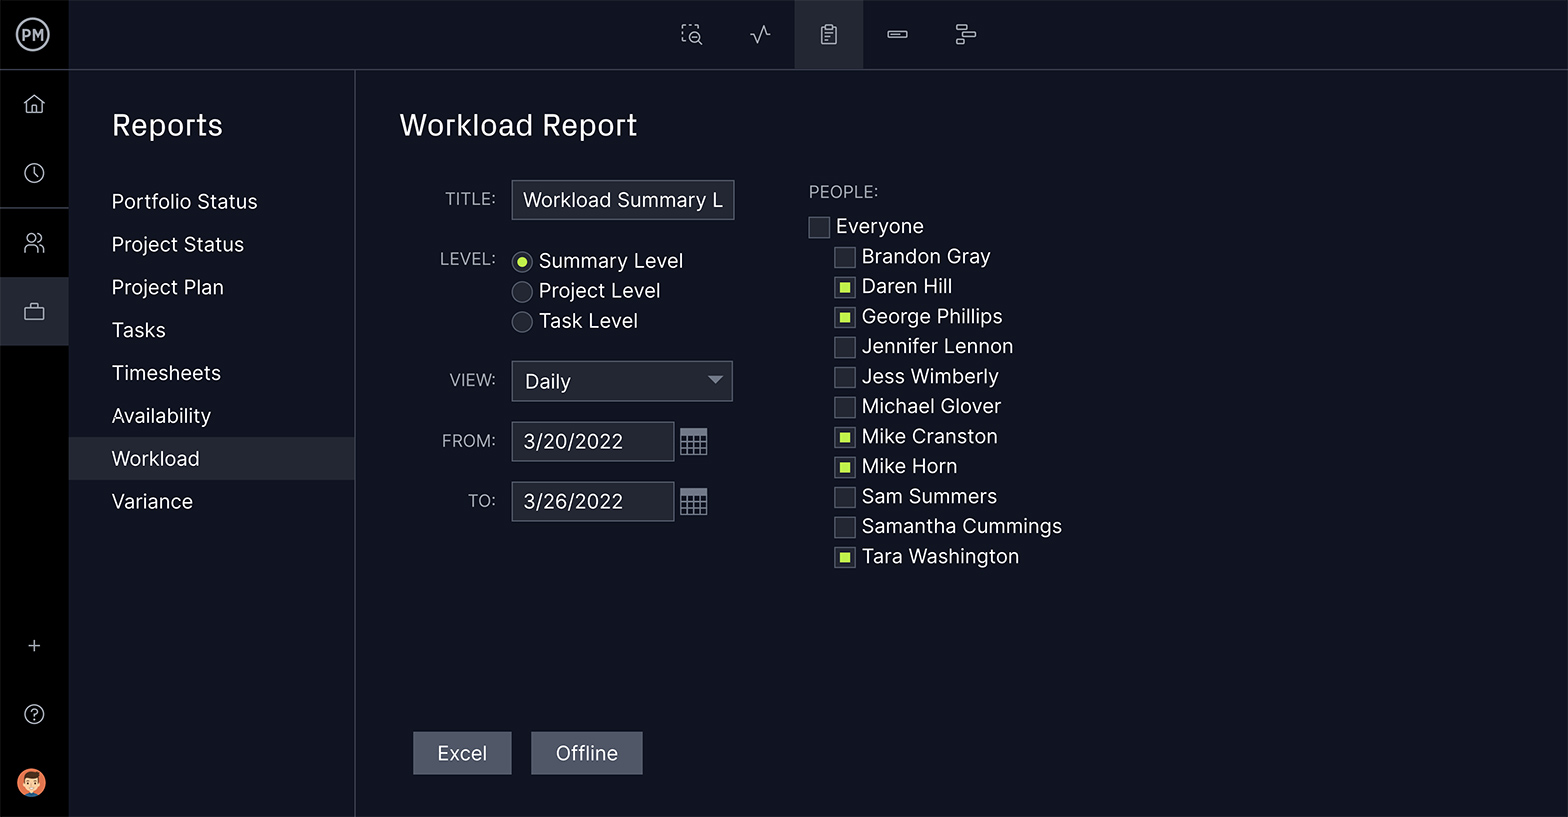 ProjectManager's workload features are perfect for resource management